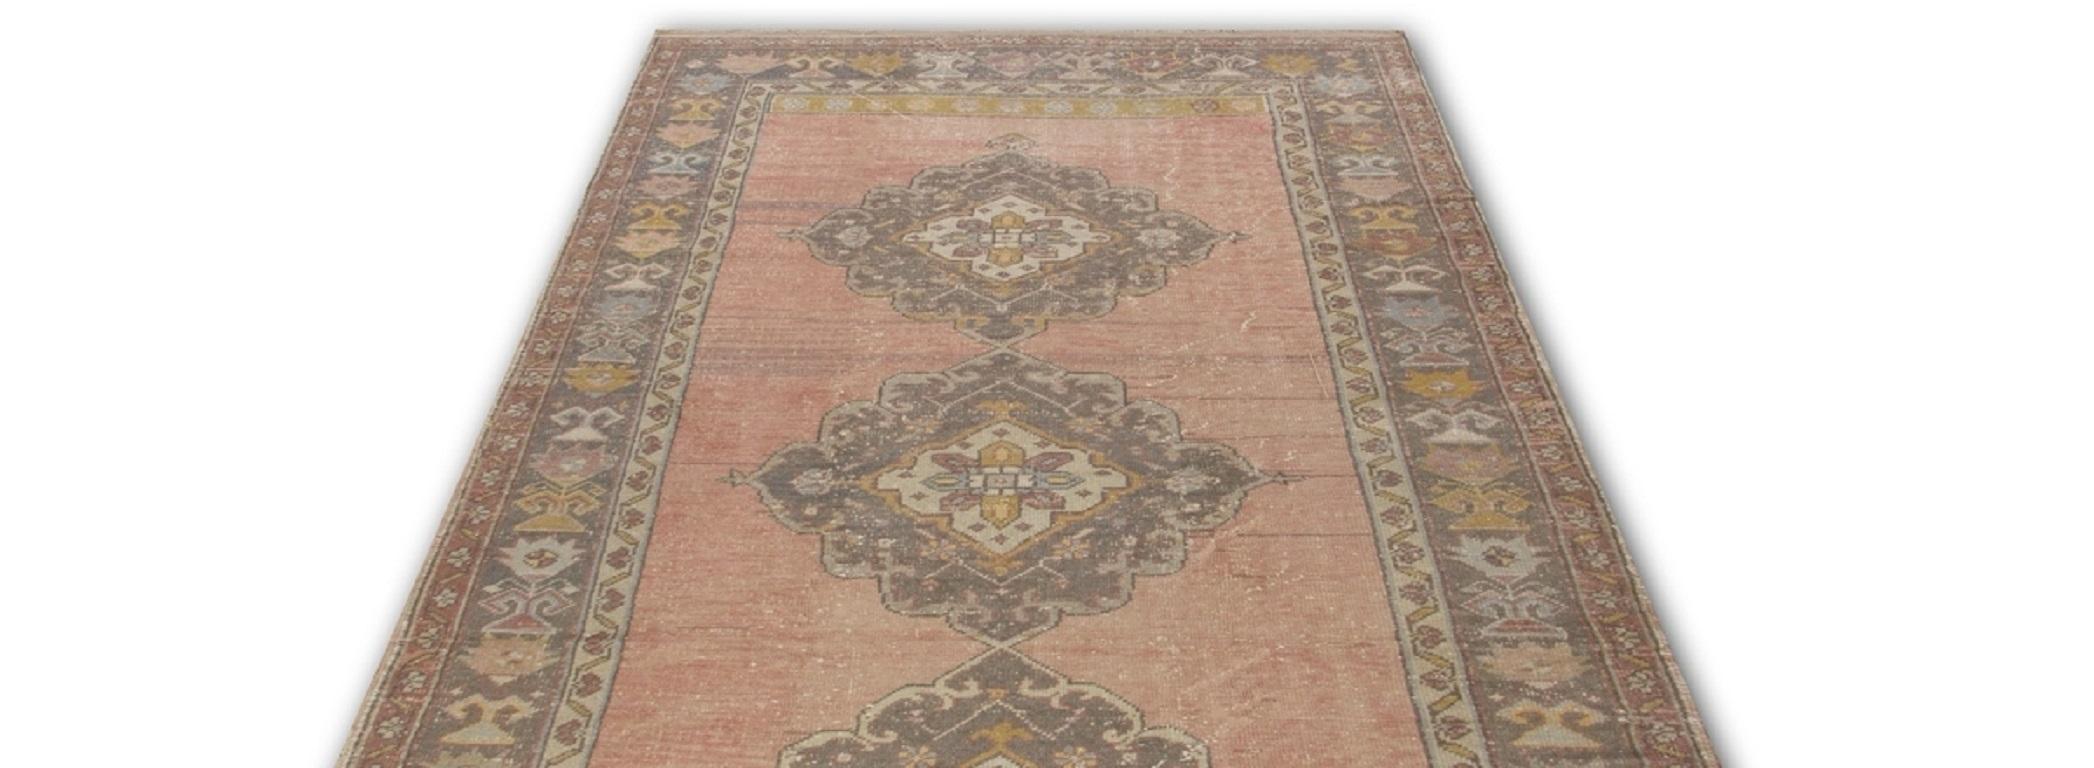 A finely hand-knotted vintage Turkish runner rug from the 1960s with even low wool pile on cotton foundation. It features linked medallions running across its length against a plain field and a large three-layered larger border decorated with